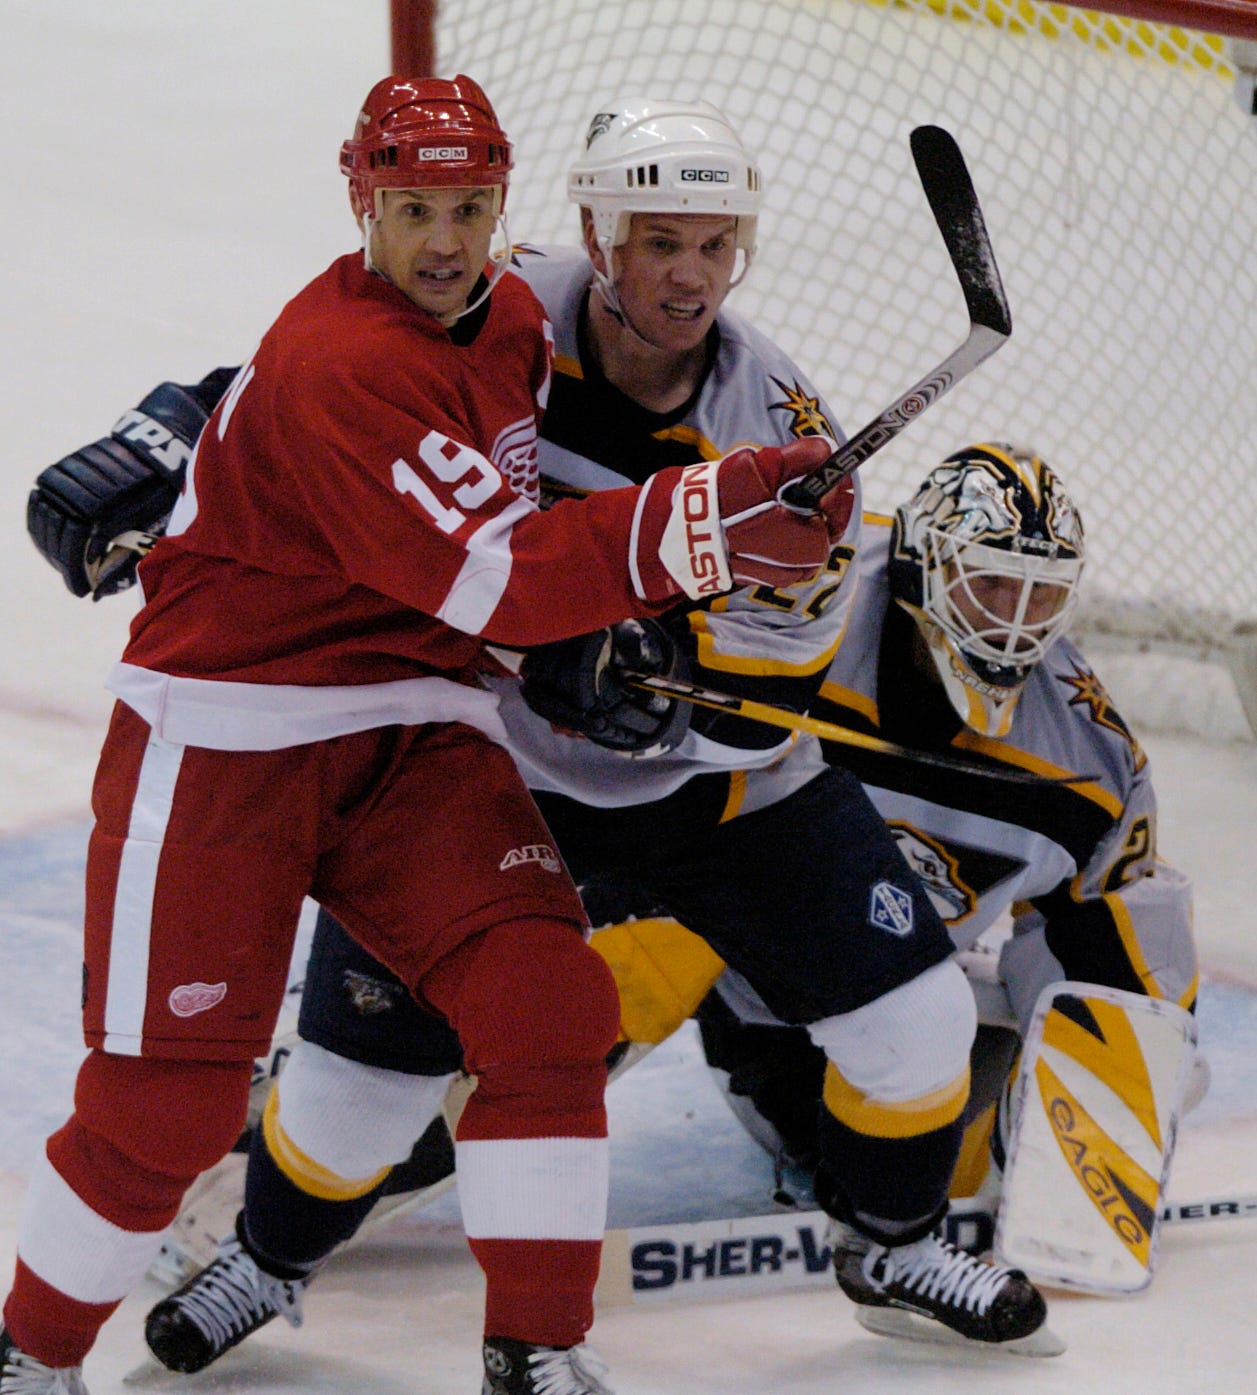 Greg Johnson, here battling with Steve Yzerman in front of the net, was traded to Pittsburgh by Detroit in 1997.